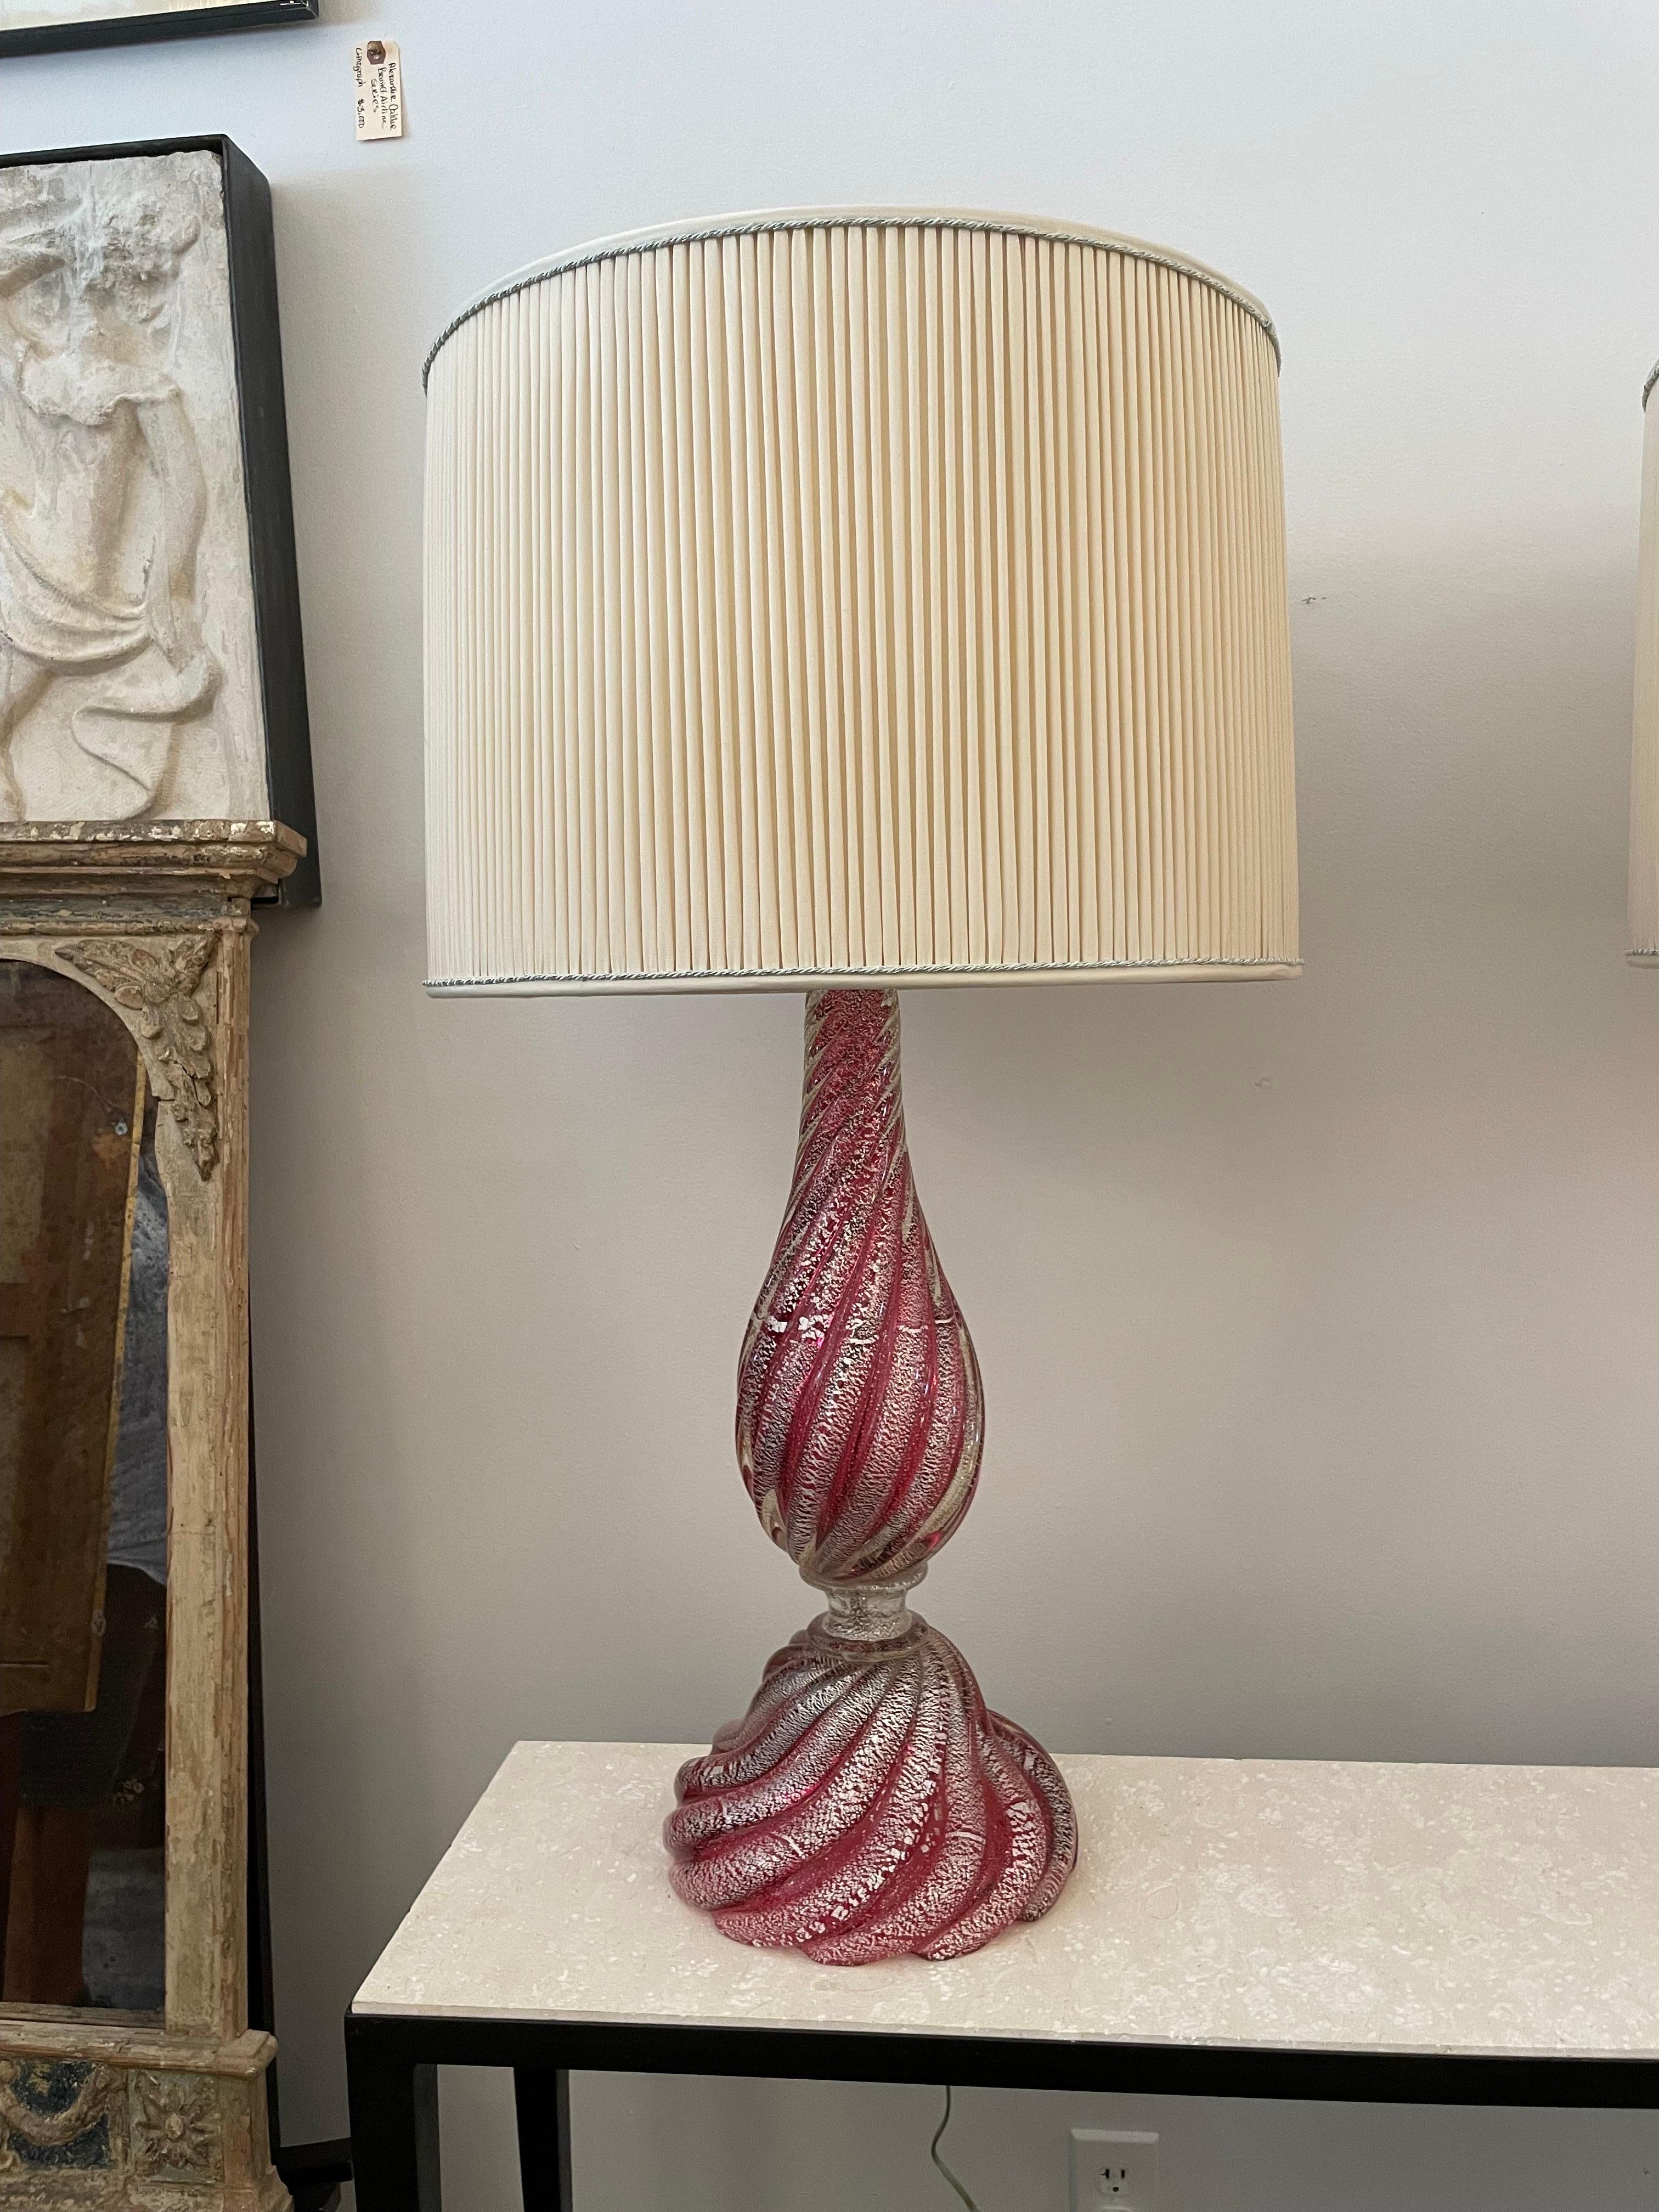 Oversized Raspberry Murano Glass Lamps W/ Silver Foil Inclusions by Barovier For Sale 3